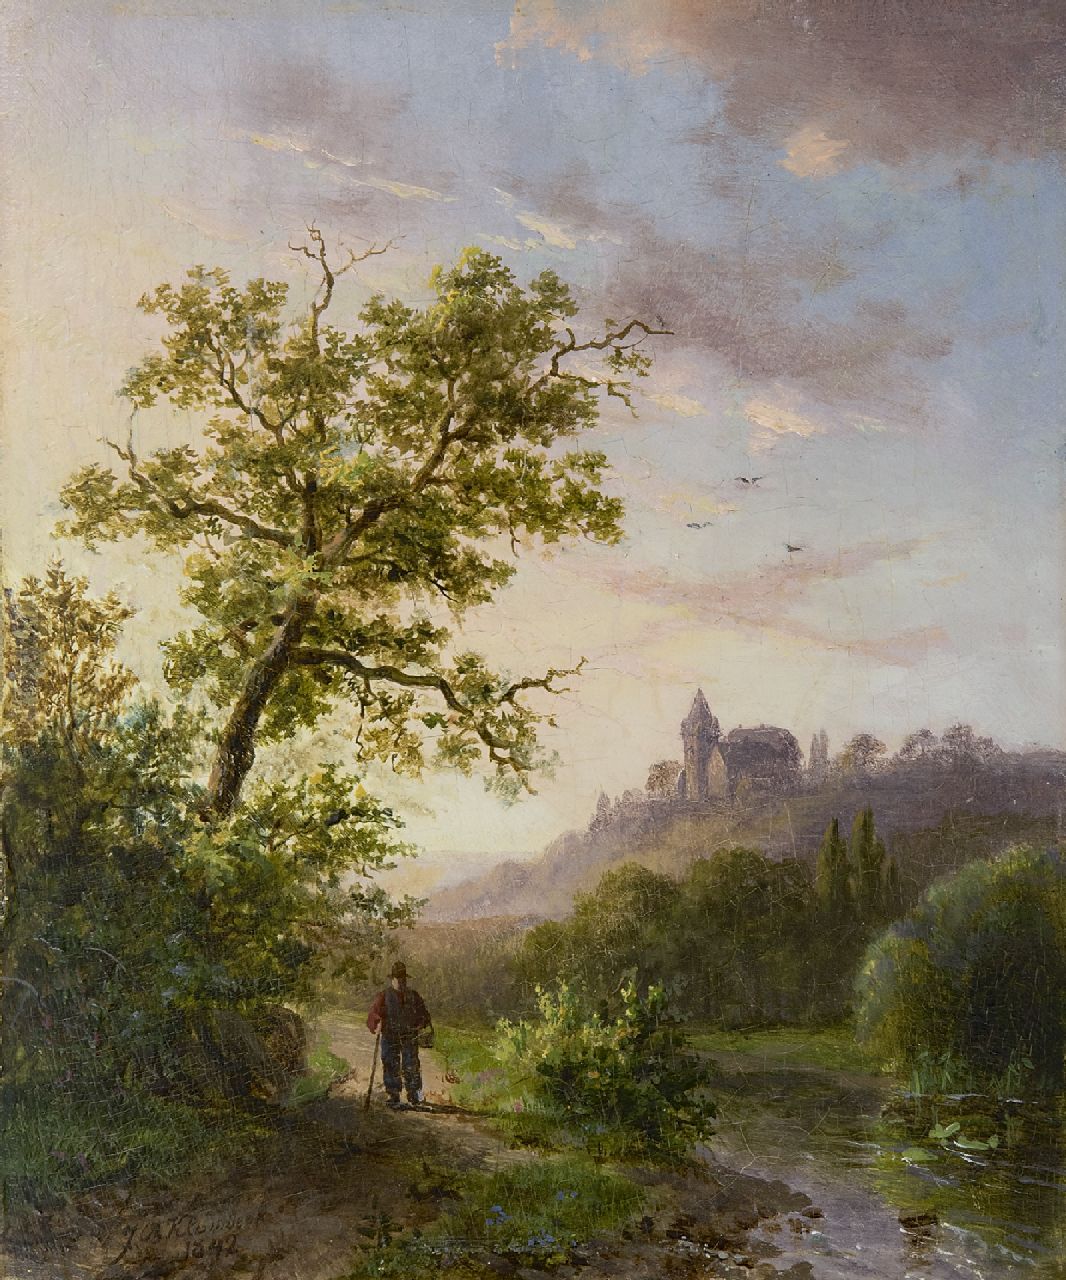 Klombeck J.B.  | Johann Bernard Klombeck | Paintings offered for sale | Rhinelandscape in summer, oil on panel 16.3 x 13.5 cm, signed l.l. and dated 1842